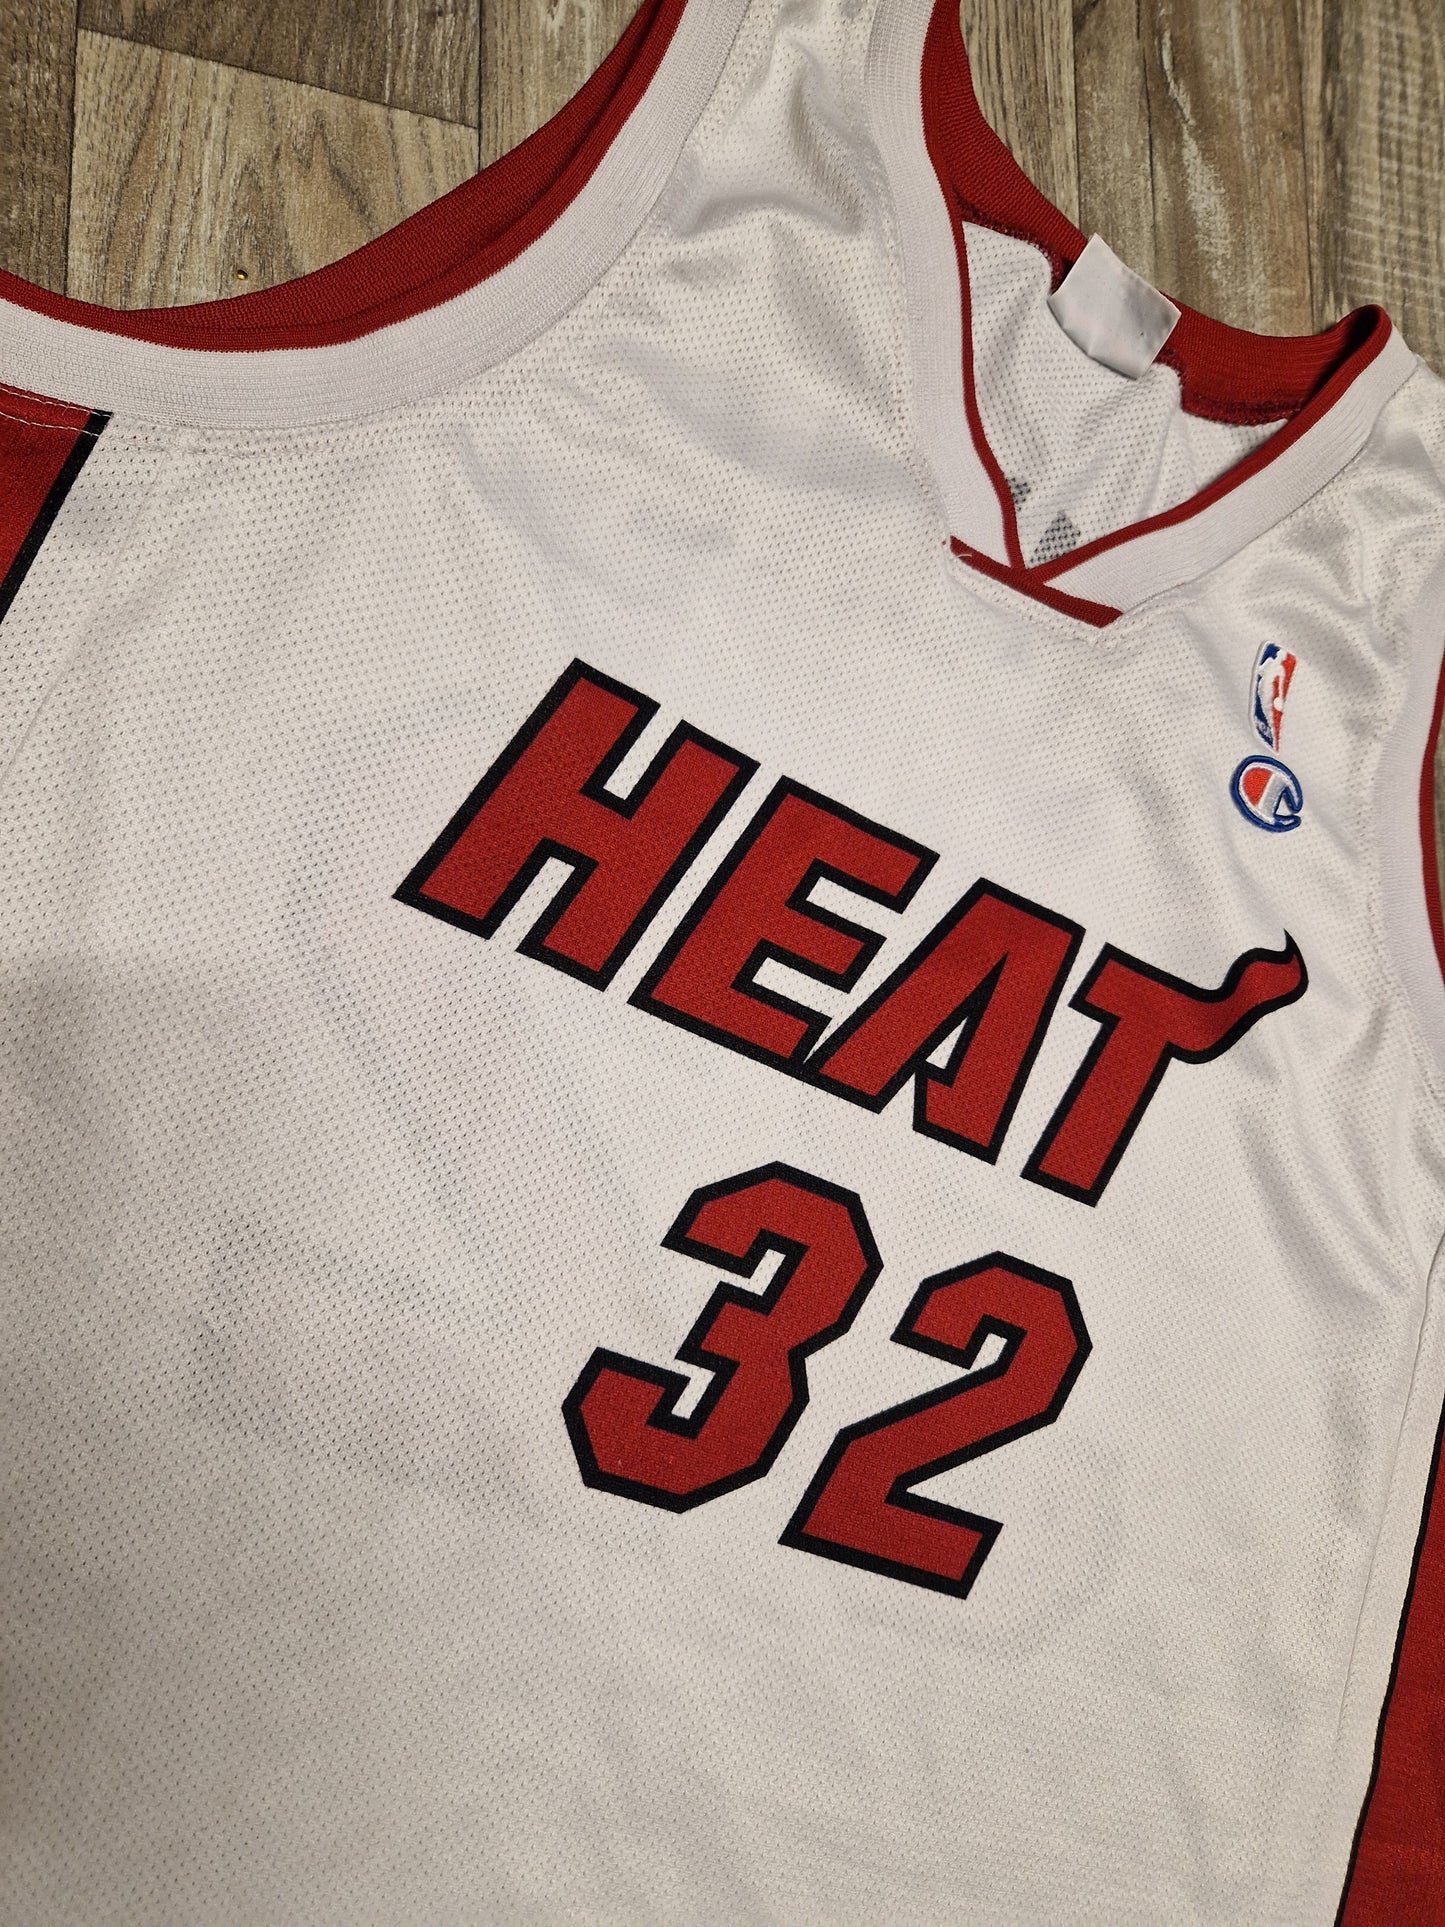 Shaquille O'Neal Miami Heat Jersey Size XL